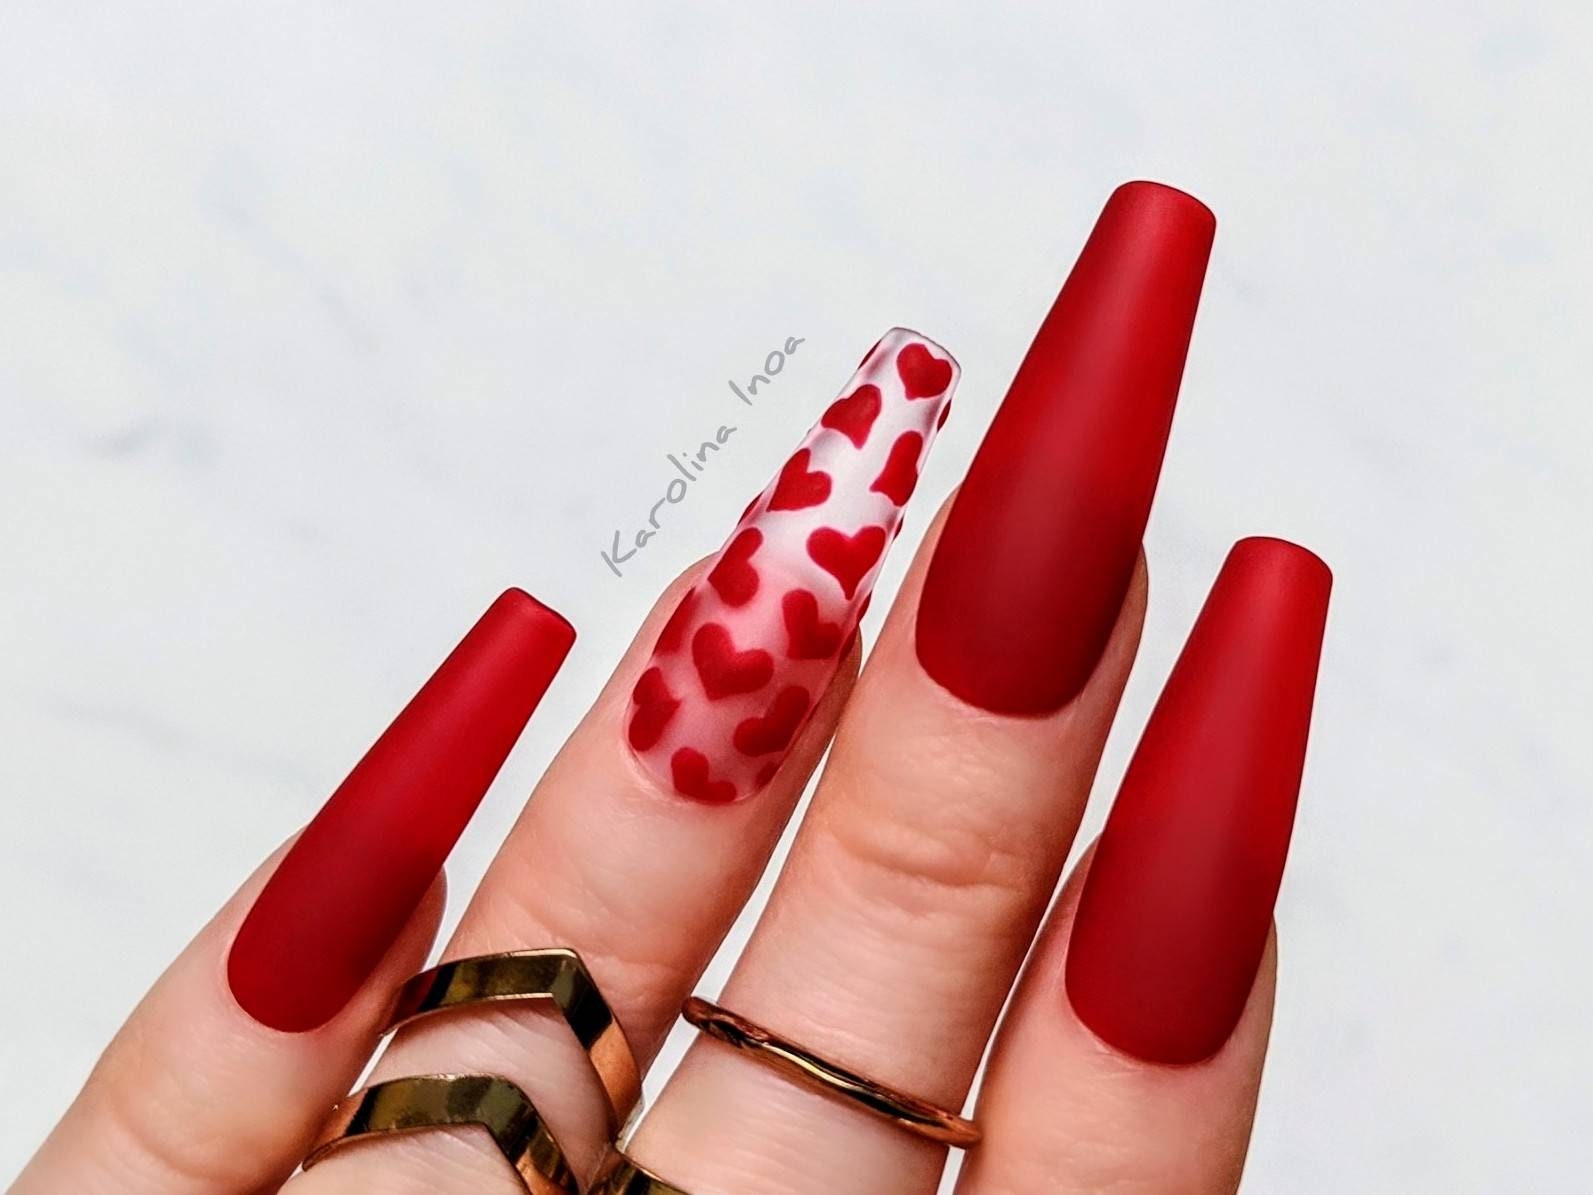 31 Cute and Easy Valentine's Day Nail Art Ideas